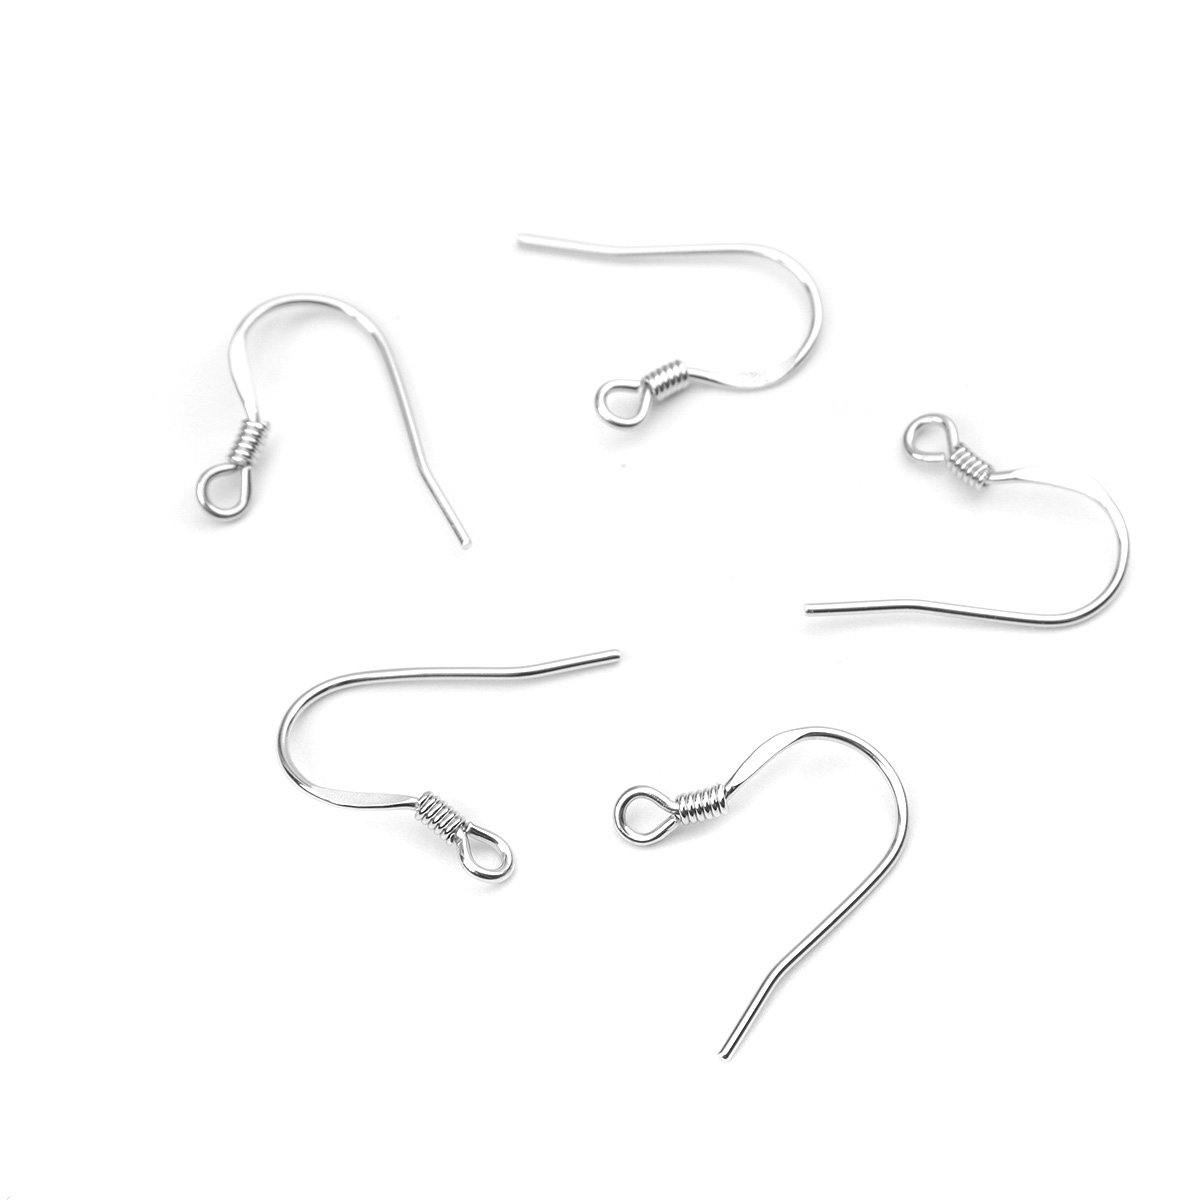 Picture of Sterling Silver Ear Wire Hooks Earring Findings Platinum Plated W/ Loop 17mm x 15mm, Post/ Wire Size: (21 gauge), 2 PCs